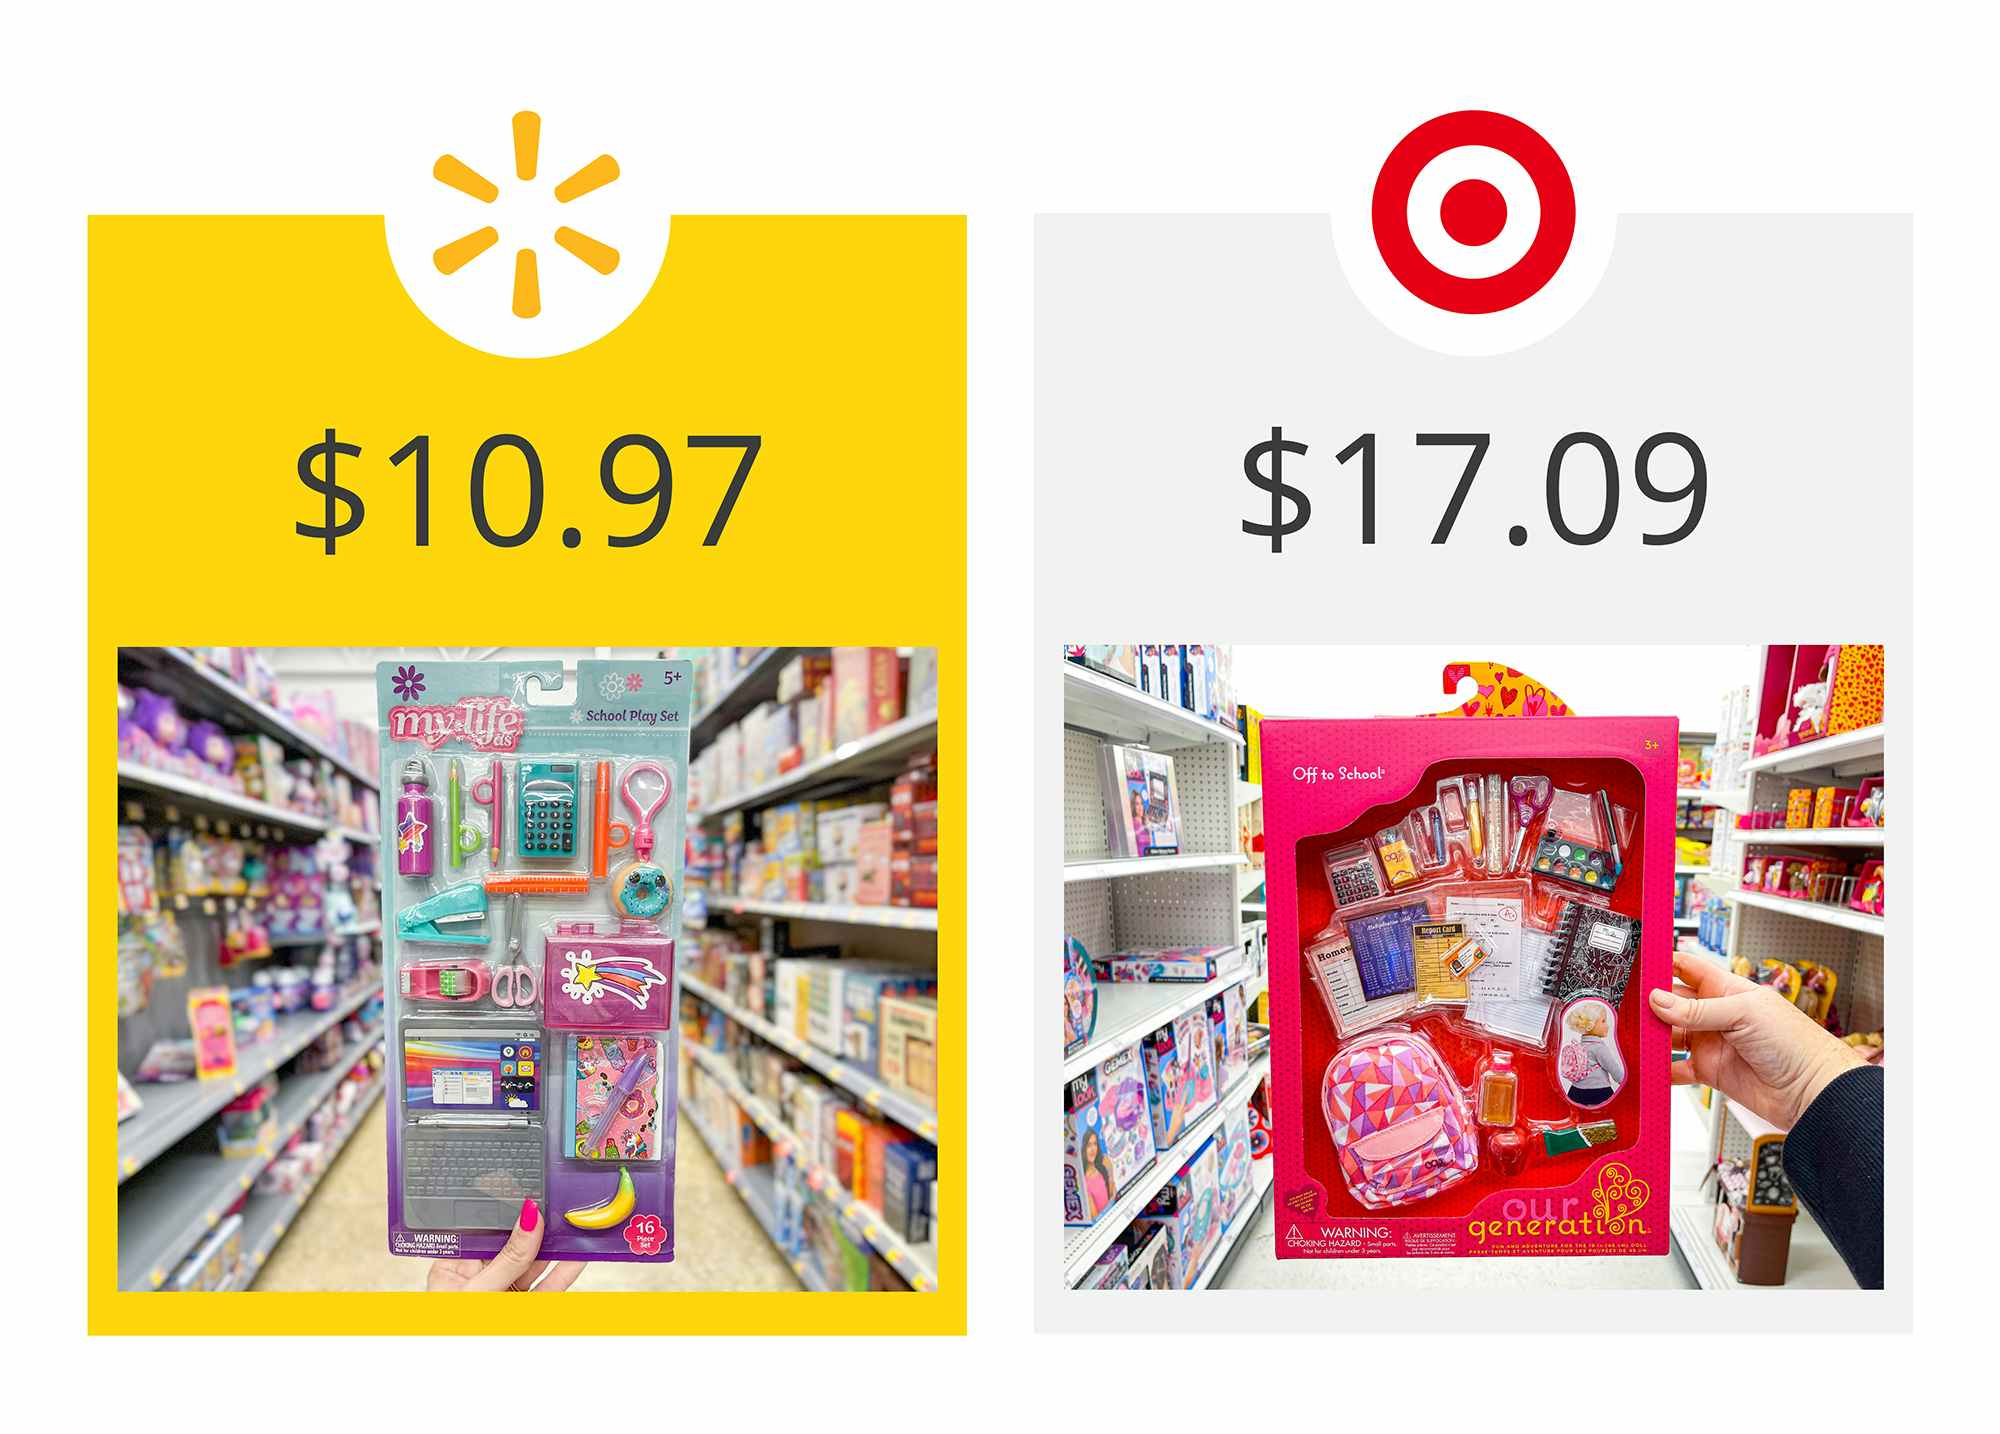 walmart as the winner on a graphic showing price comparison between target's our generation and walmart's my life as doll school supplies